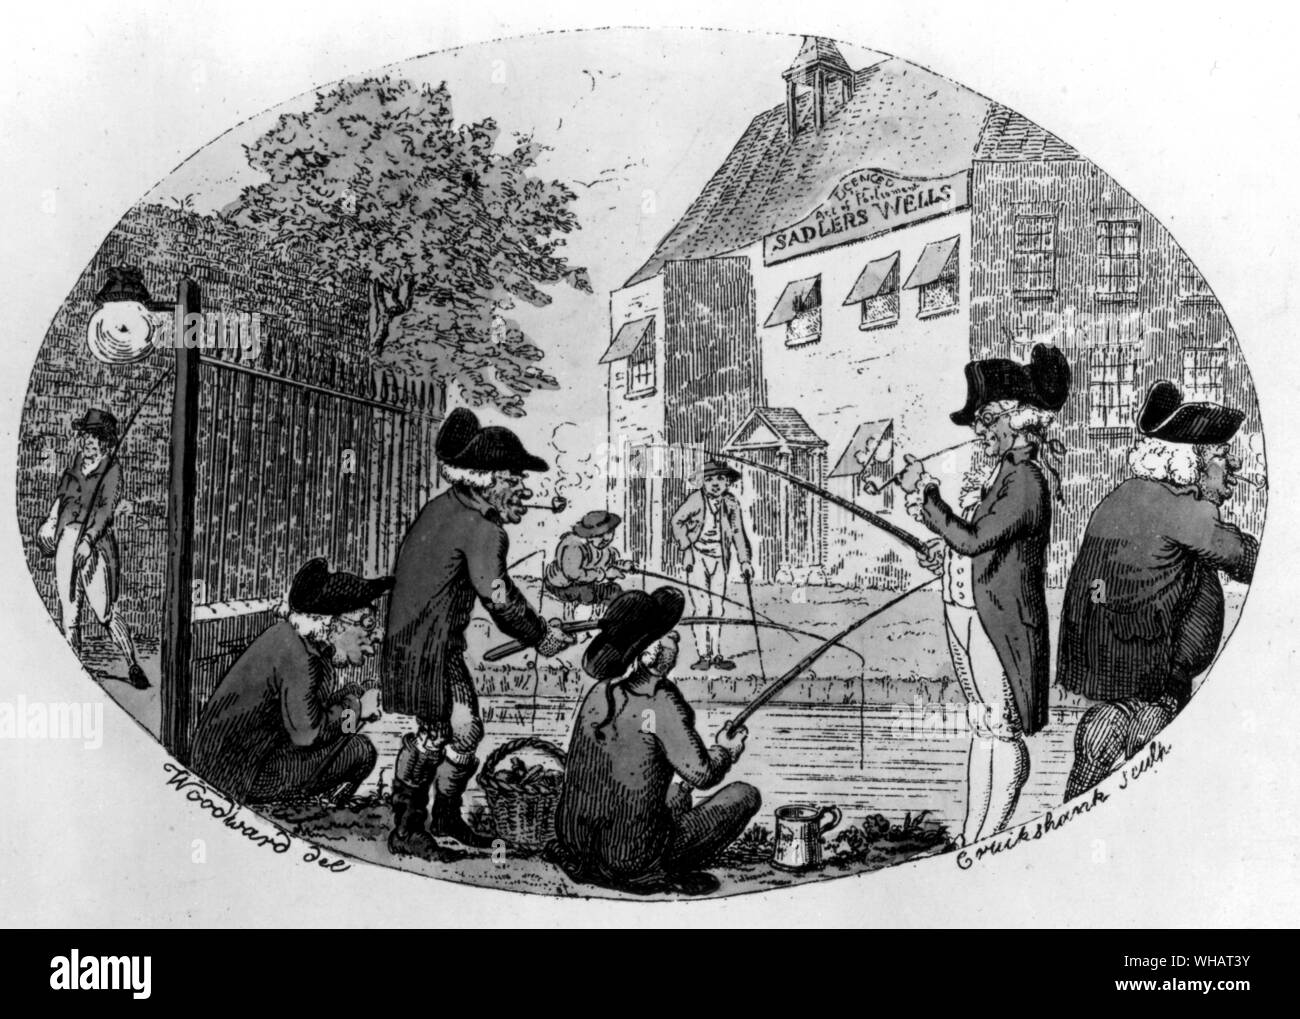 Angling at Saddlers Wells. by Cruickshank after Woodward. published 1796. Stock Photo